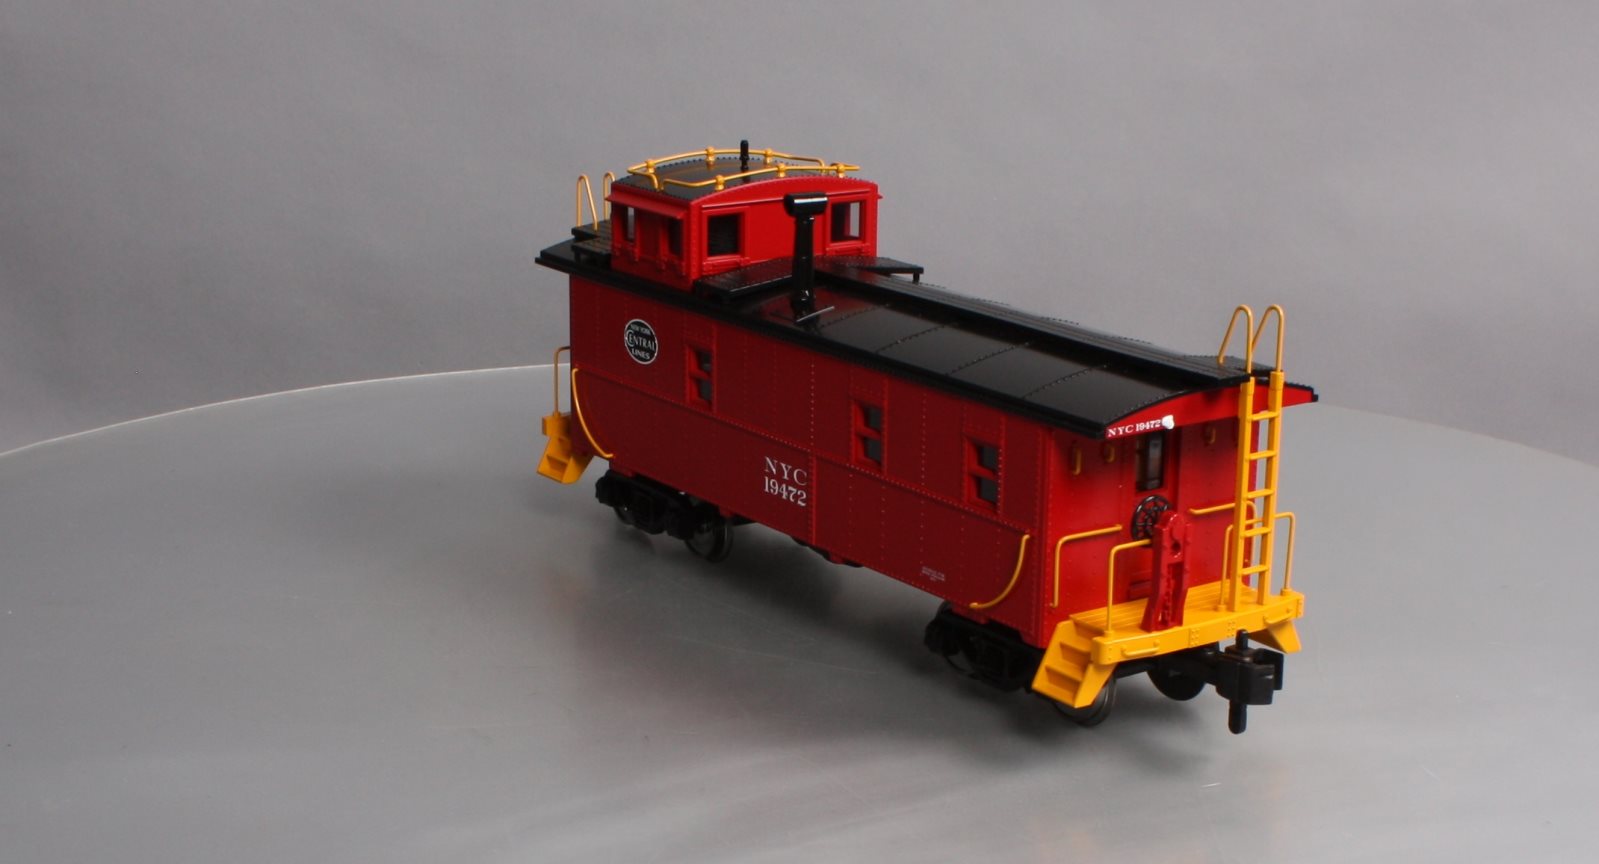 MTH 70-77032 G New York Central Offset Steel Caboose Car